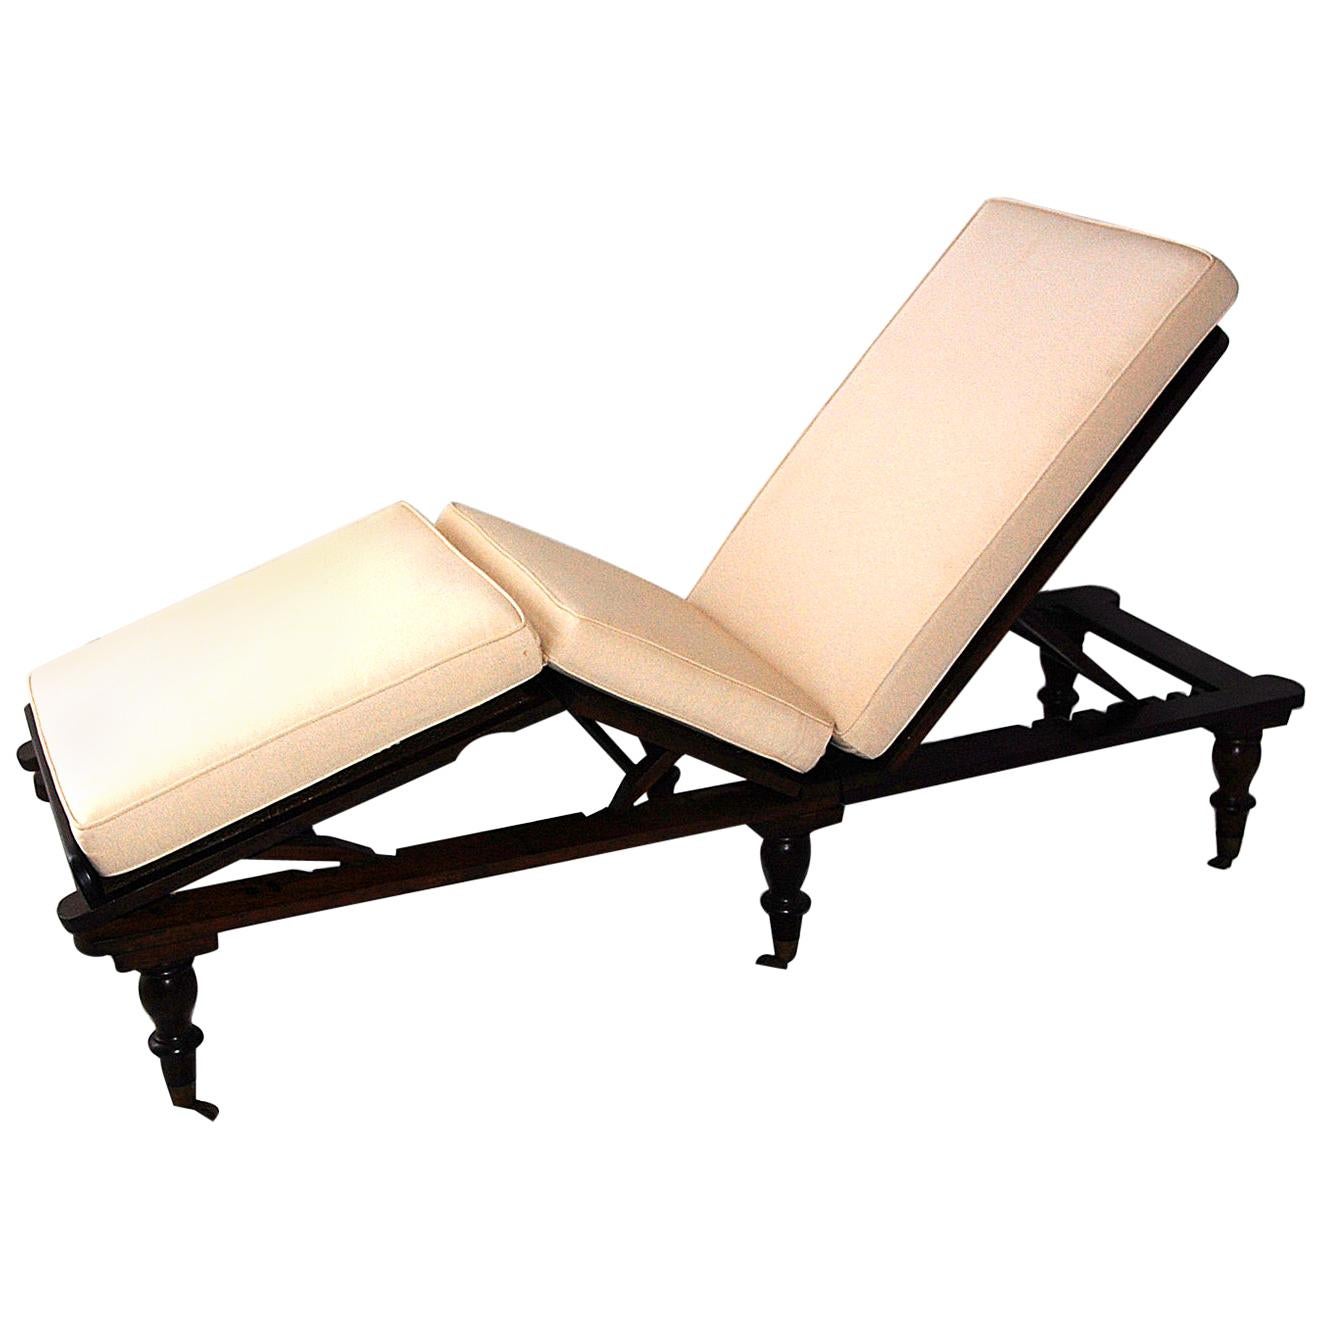 English Mid-19th Century Military Campaign Folding Chaise Lounge